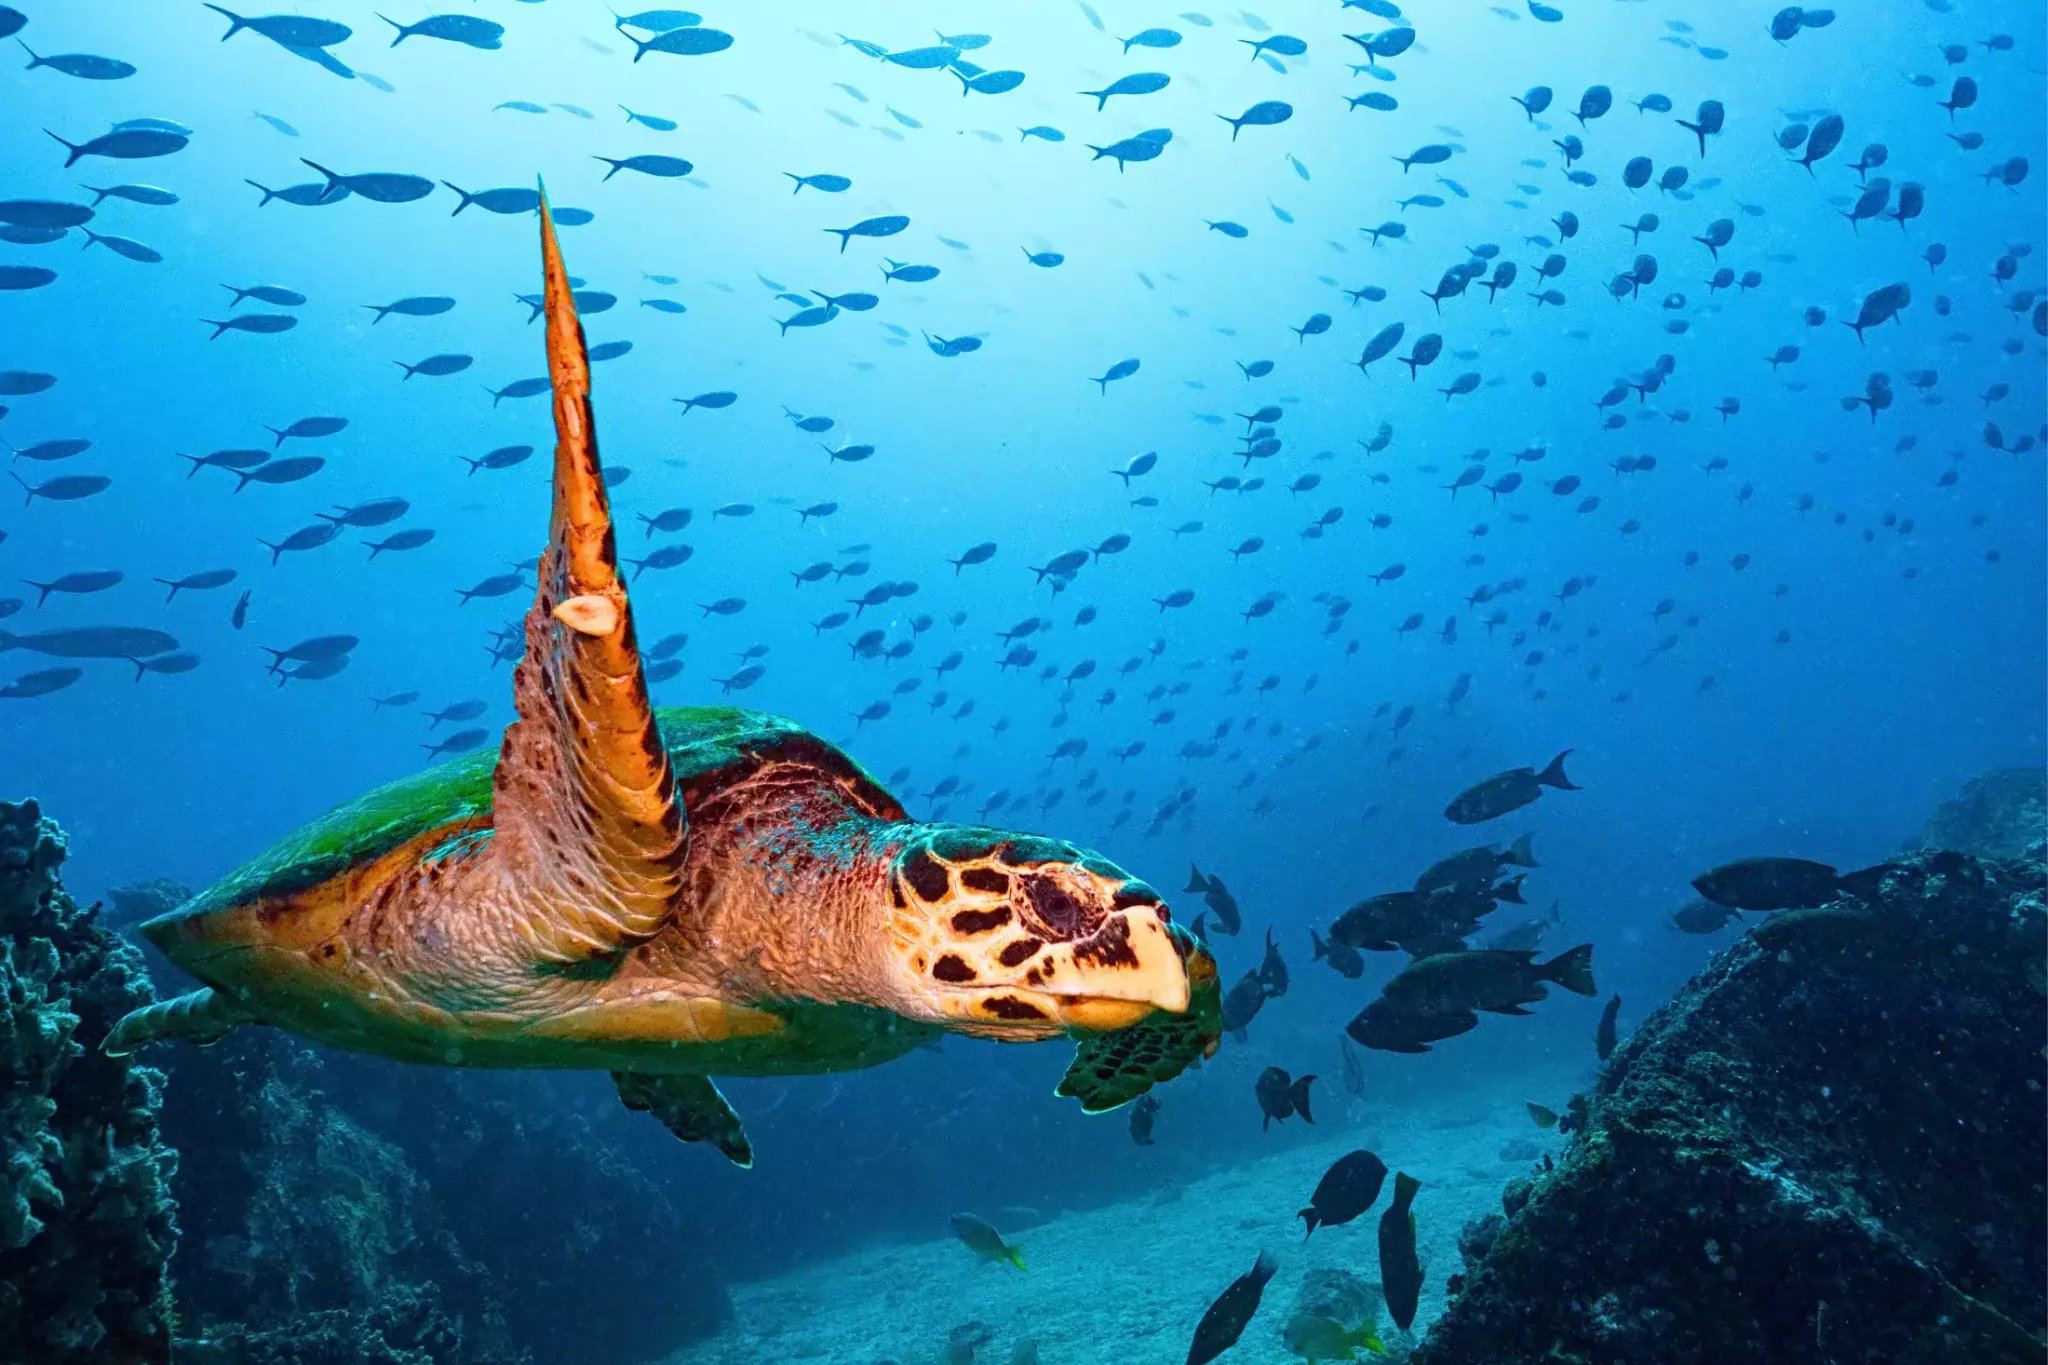 Diving with sea turtles and shoals of fish in the coral reefs of the Seychelles.